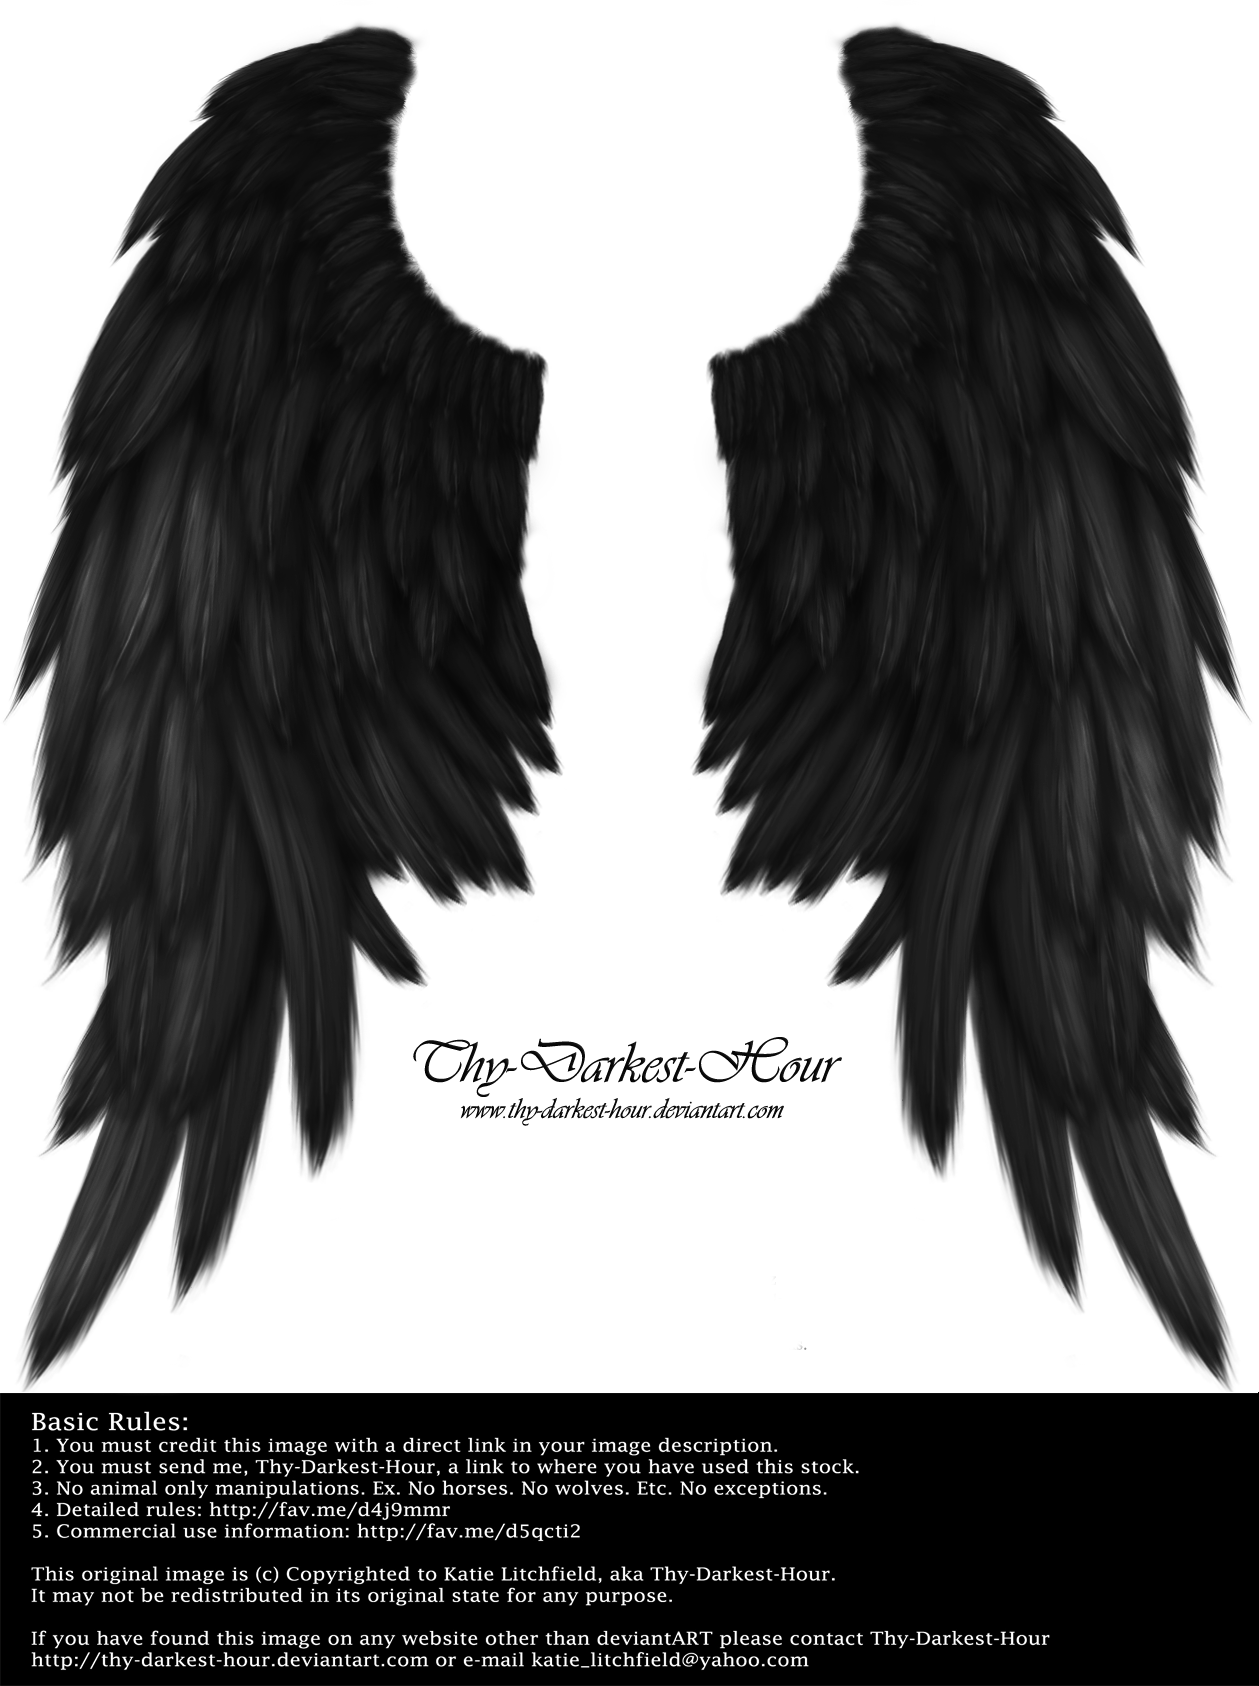 Wing clipart distressed. Daydream wings black by